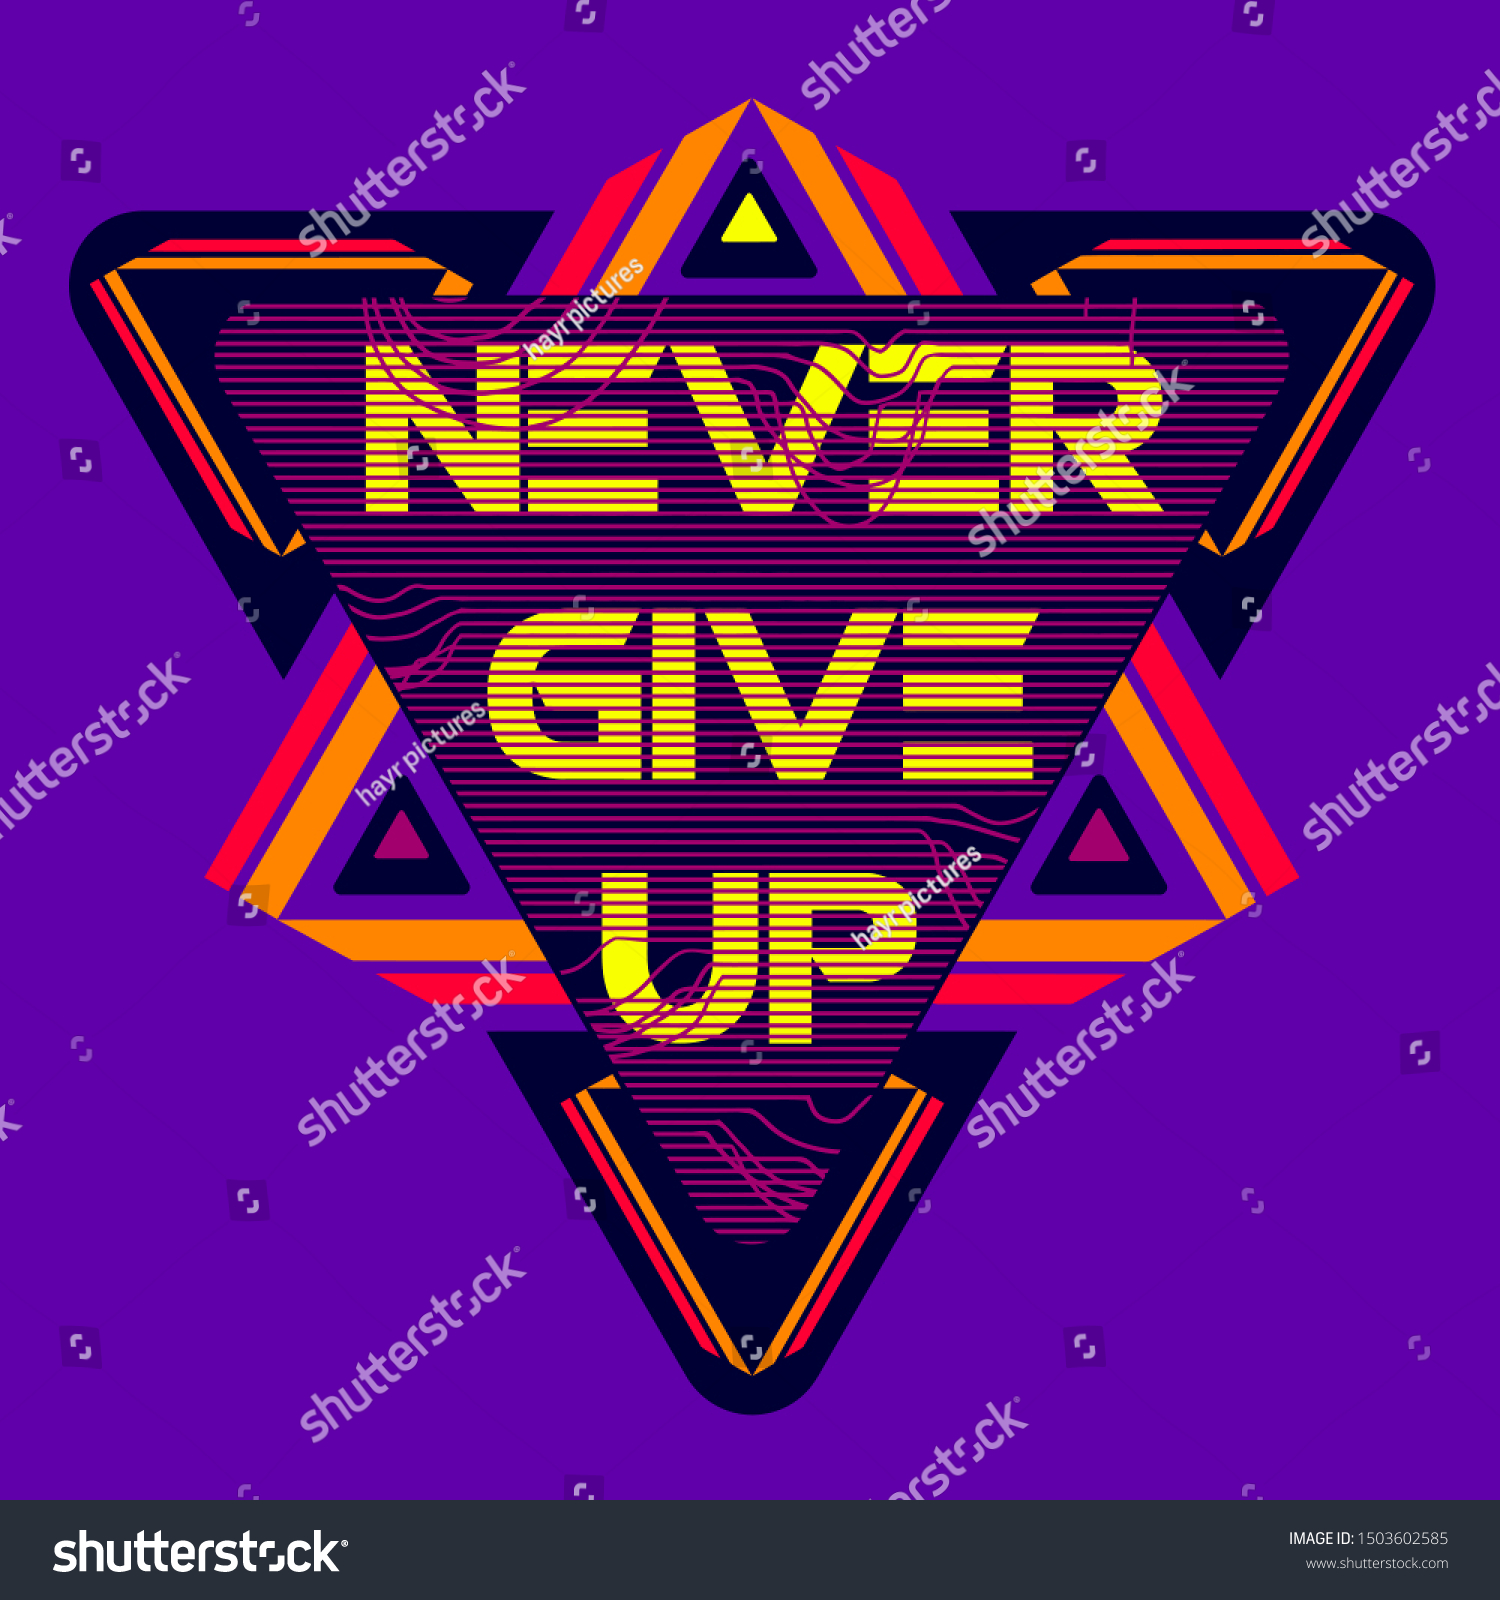 Motivational Quote Graphic Design Tee Shirt Stock Vector Royalty Images, Photos, Reviews